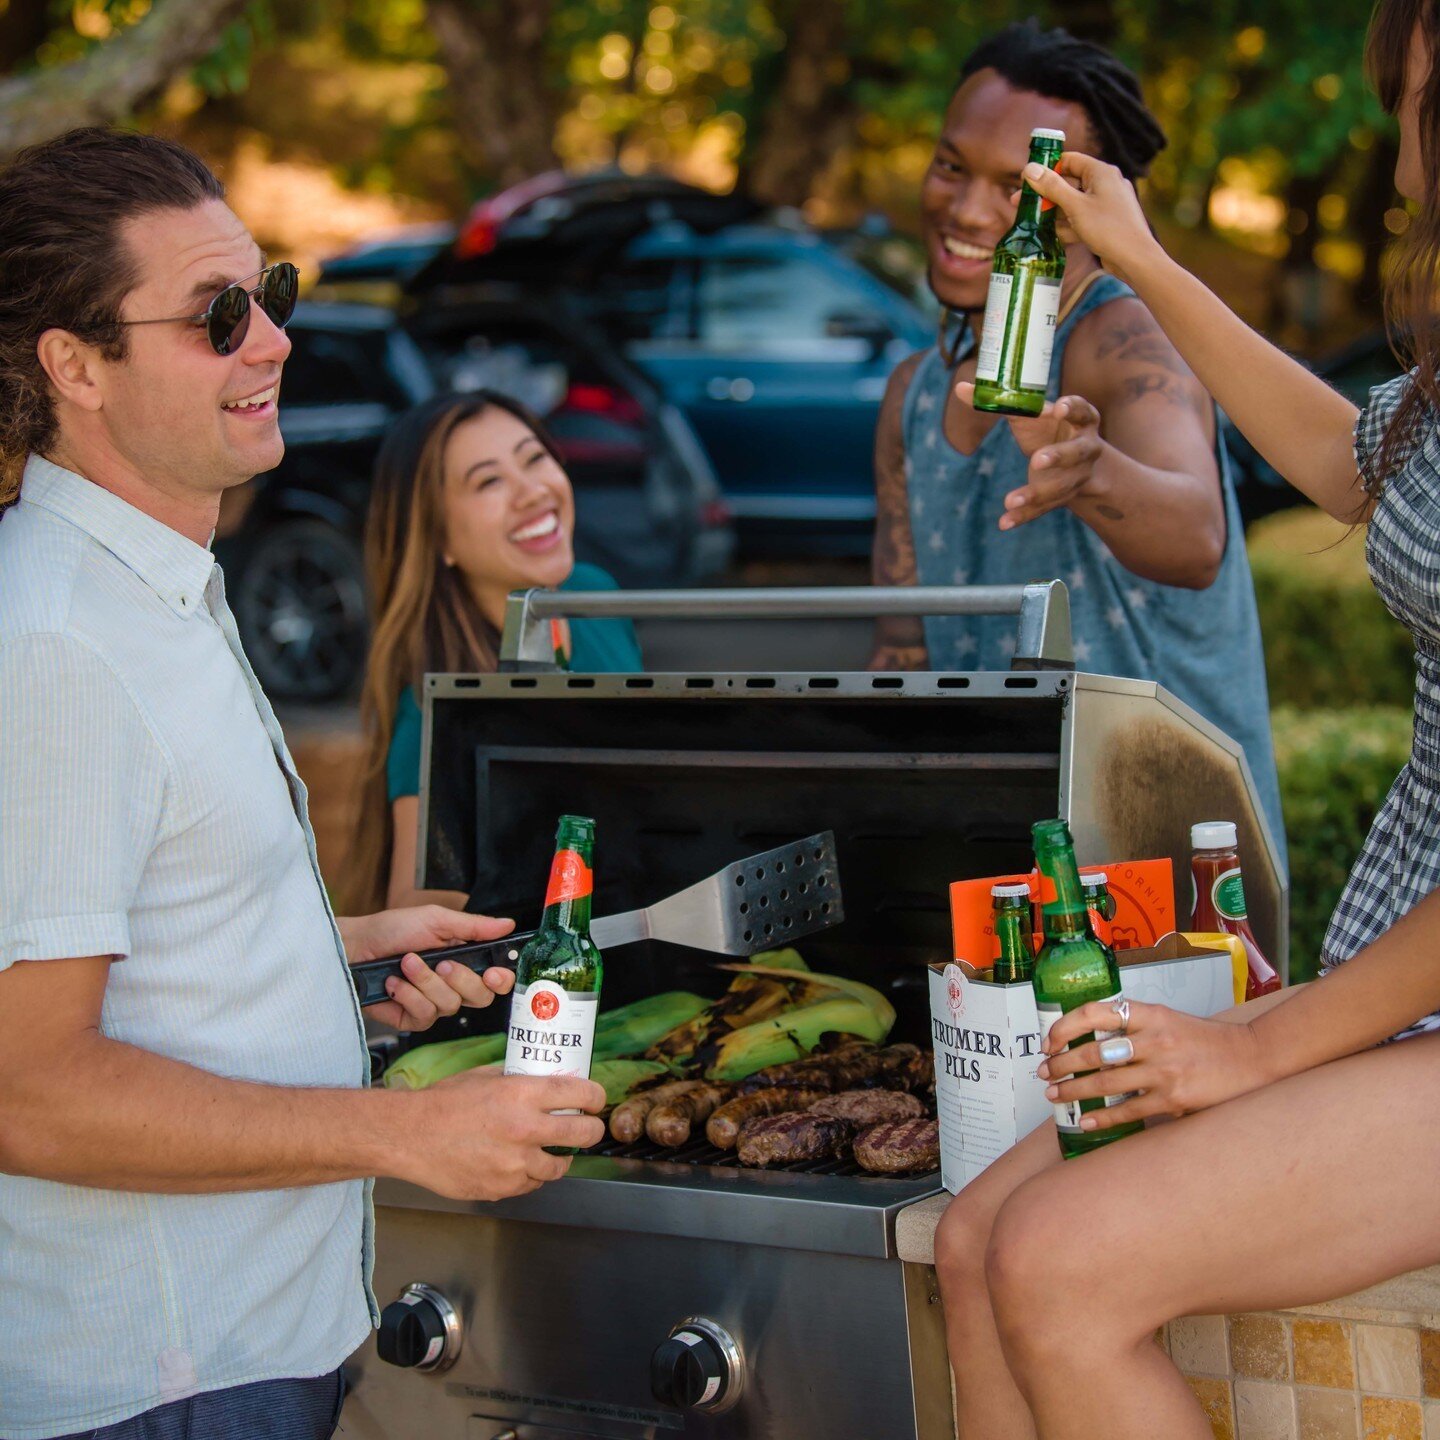 Reward your grillmaster for working on a holiday. The going rate is 1.5x more Trumer Pils than usual. 

#TheWorldsBestPilsner #BrewedInBerkeley #BayAreaBeer #LaborDay #Grilling